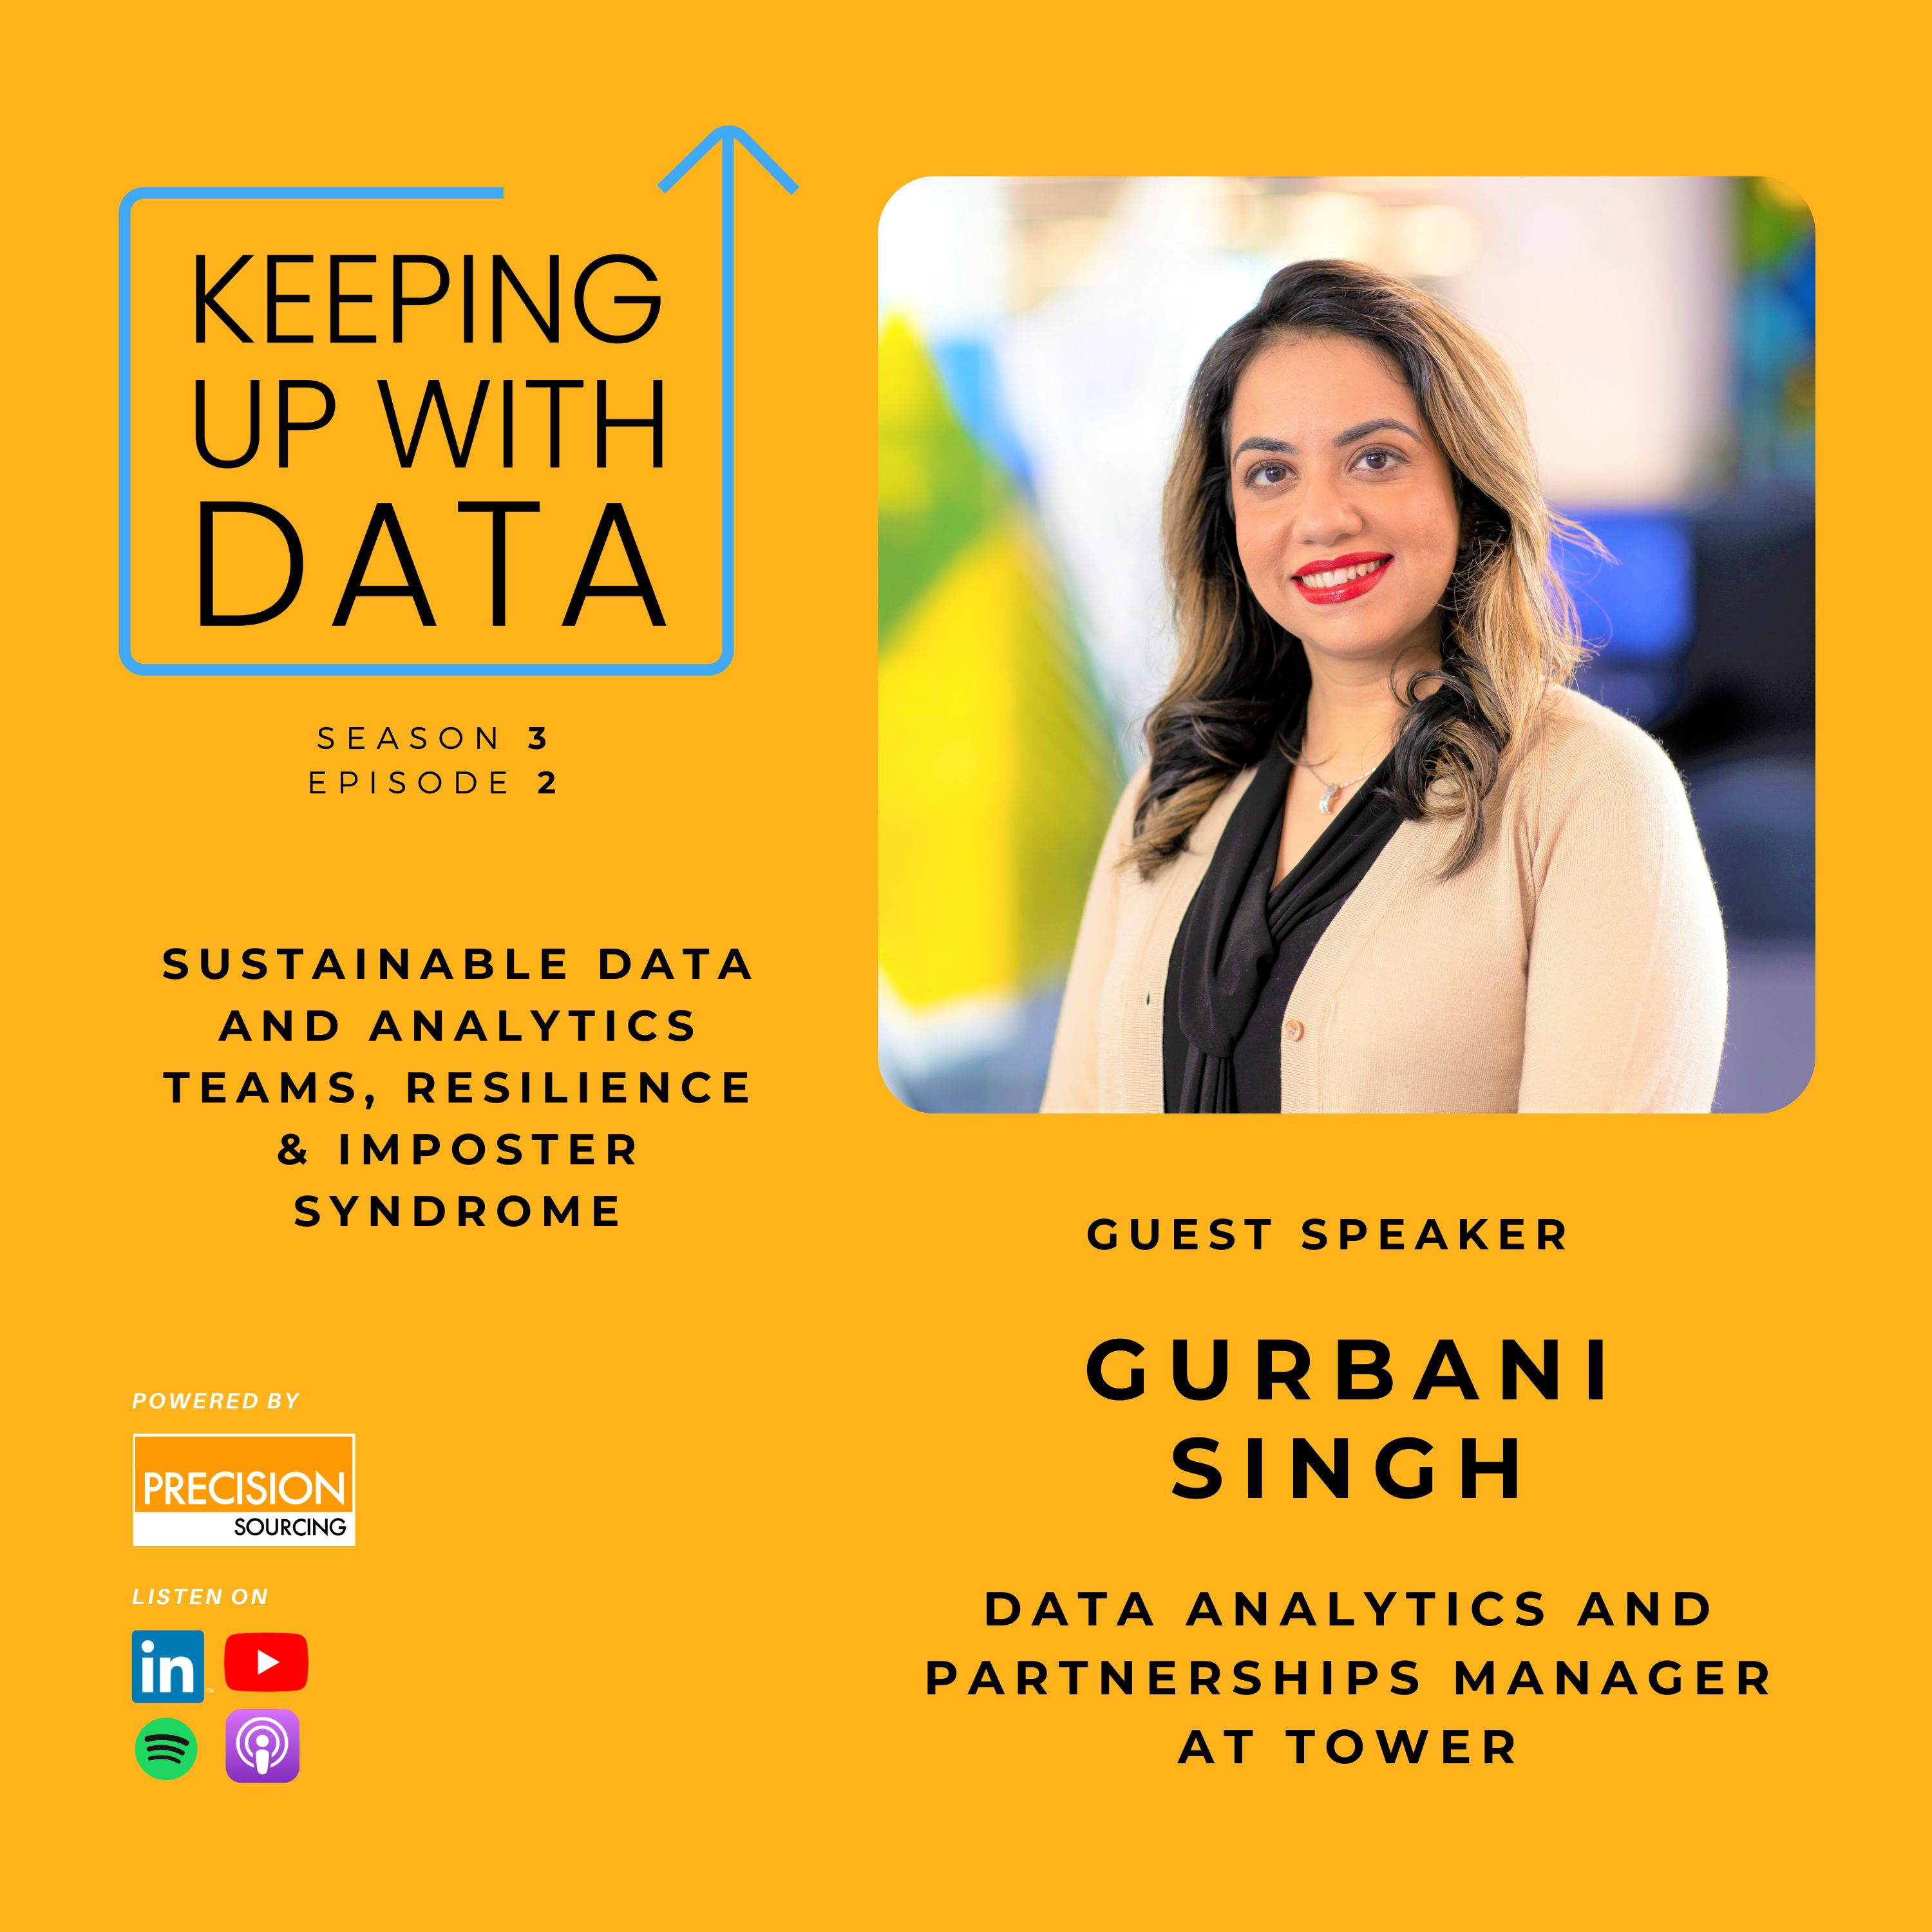 Sustainable Data And Analytics Teams, Resilience & Imposter Syndrome With Gurbani Singh